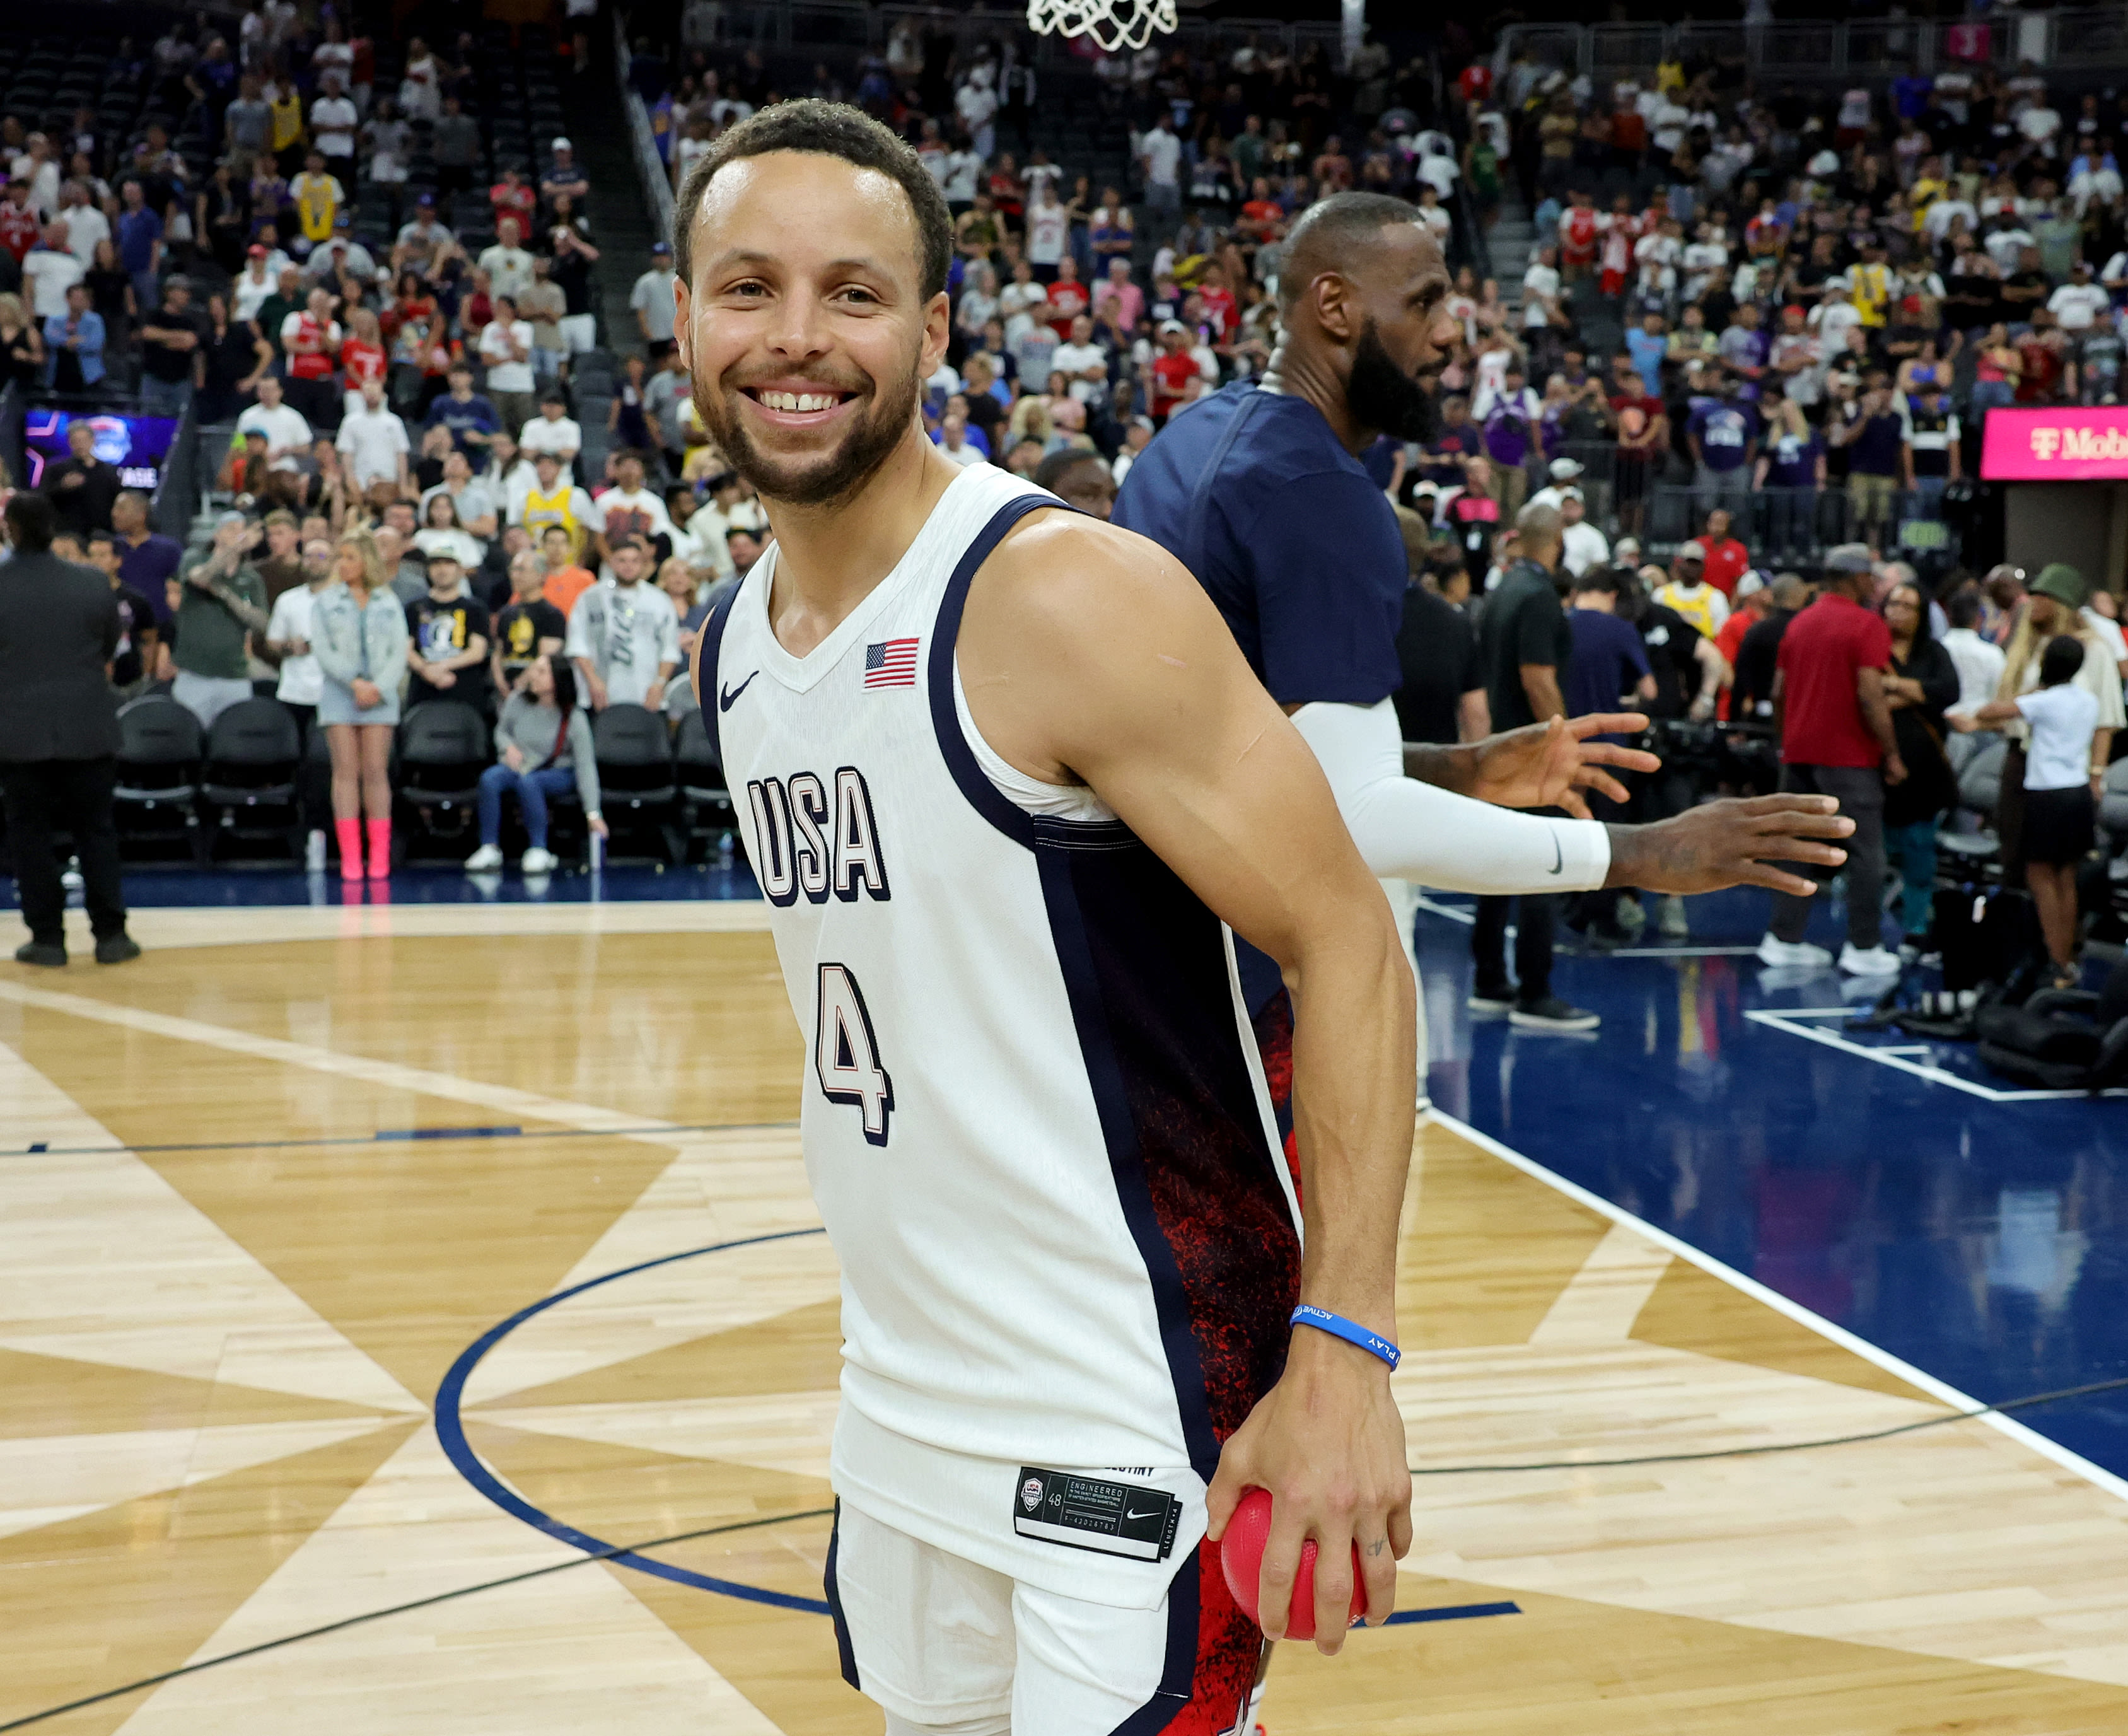 Team USA takeaways: The Steph Curry-LeBron James connection, a spark plug and big adjustments